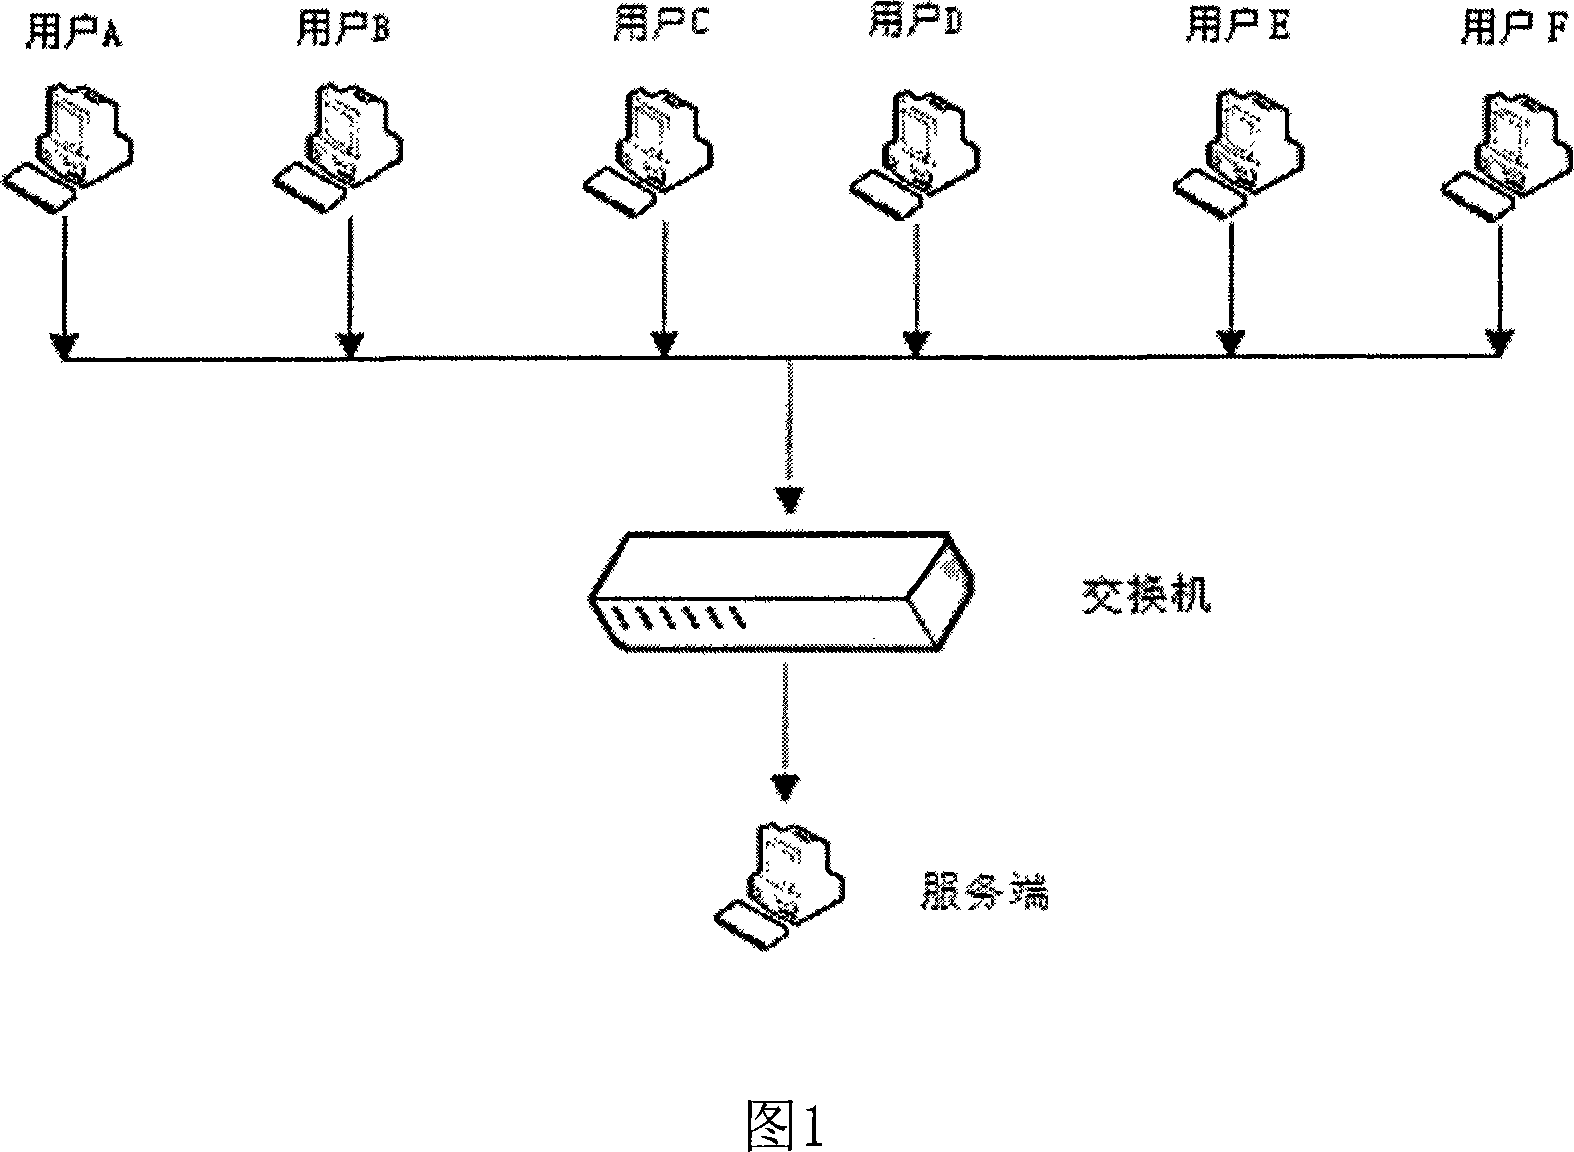 Multi-mouse long-distance control method to service end